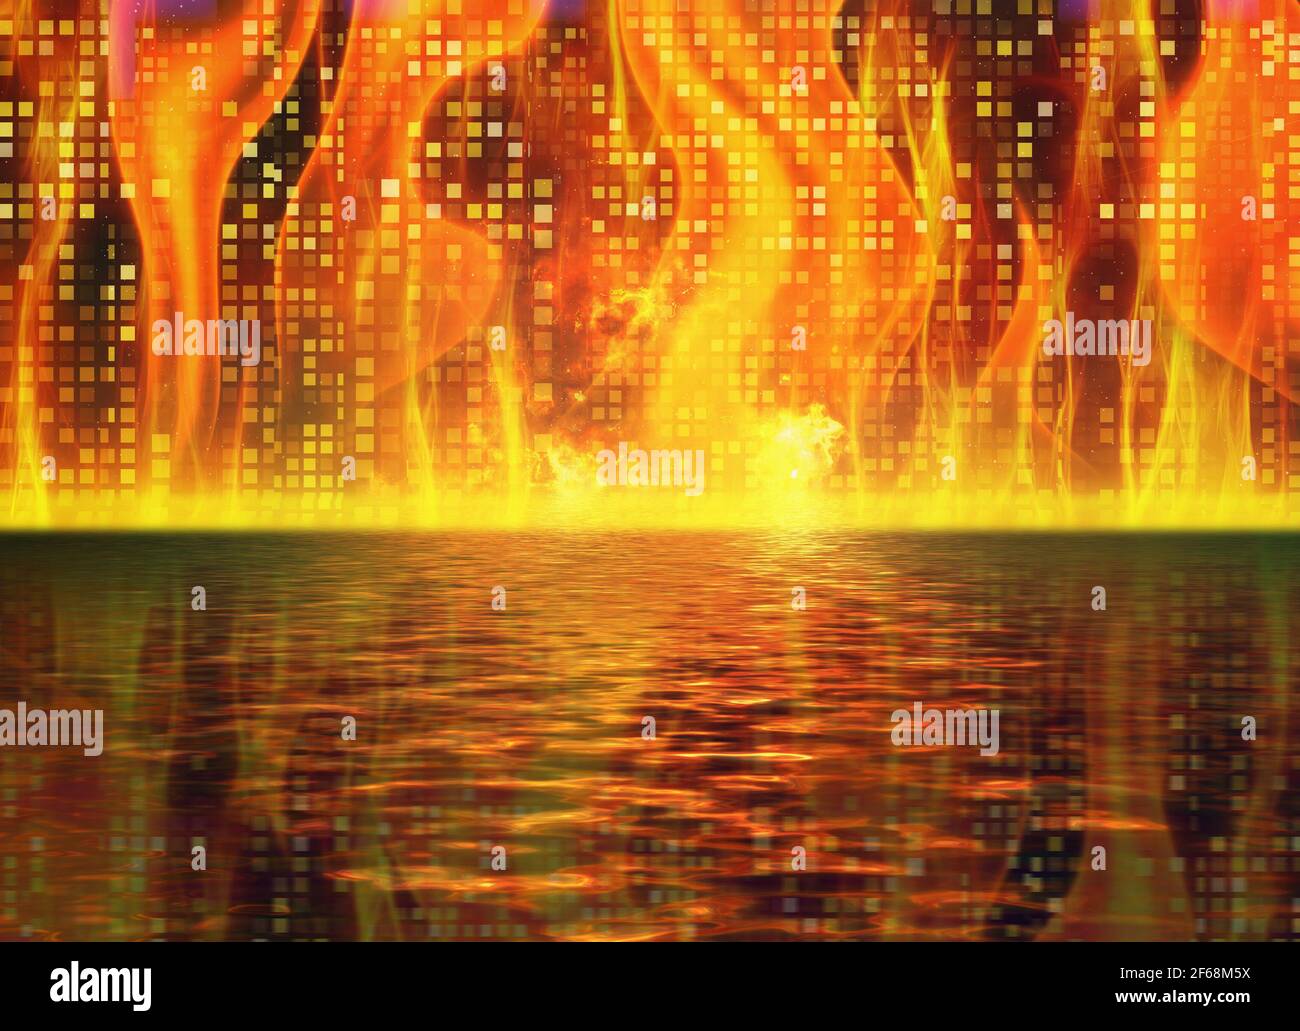 burning city reflected in a water. illustration on the theme of global cataclysm or war Stock Photo